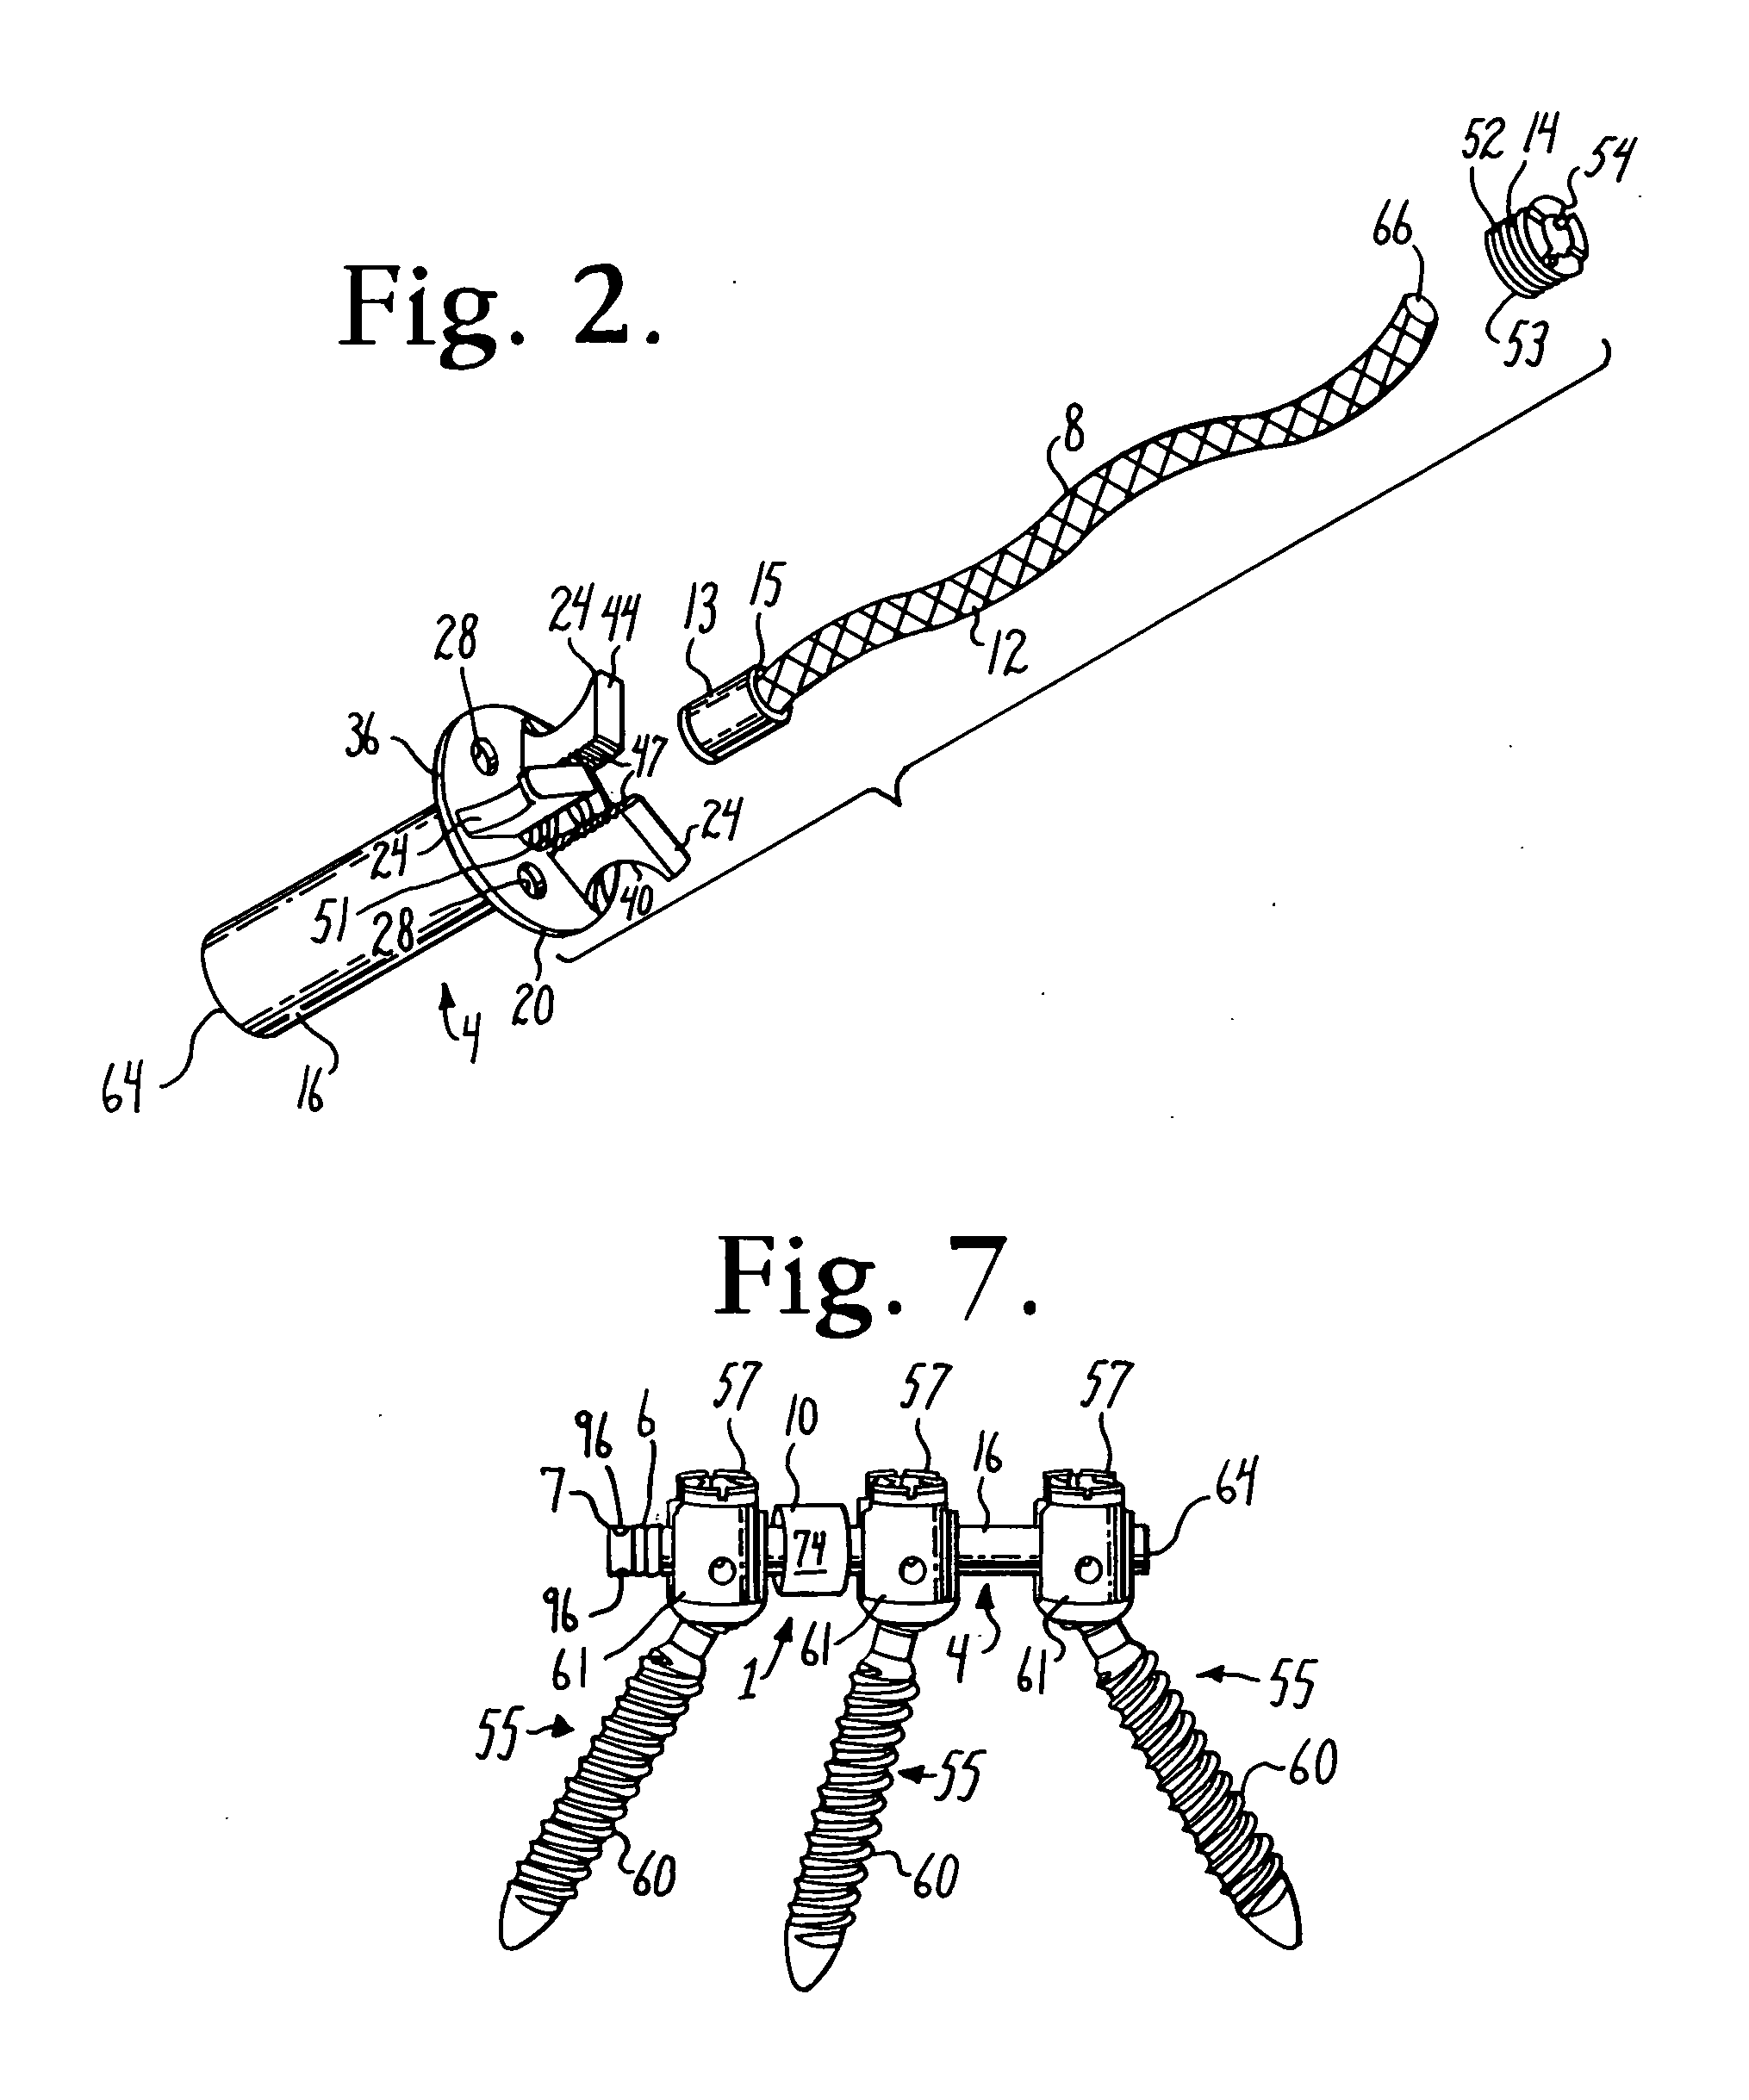 Dynamic stabilization member with fin support and cable core extension